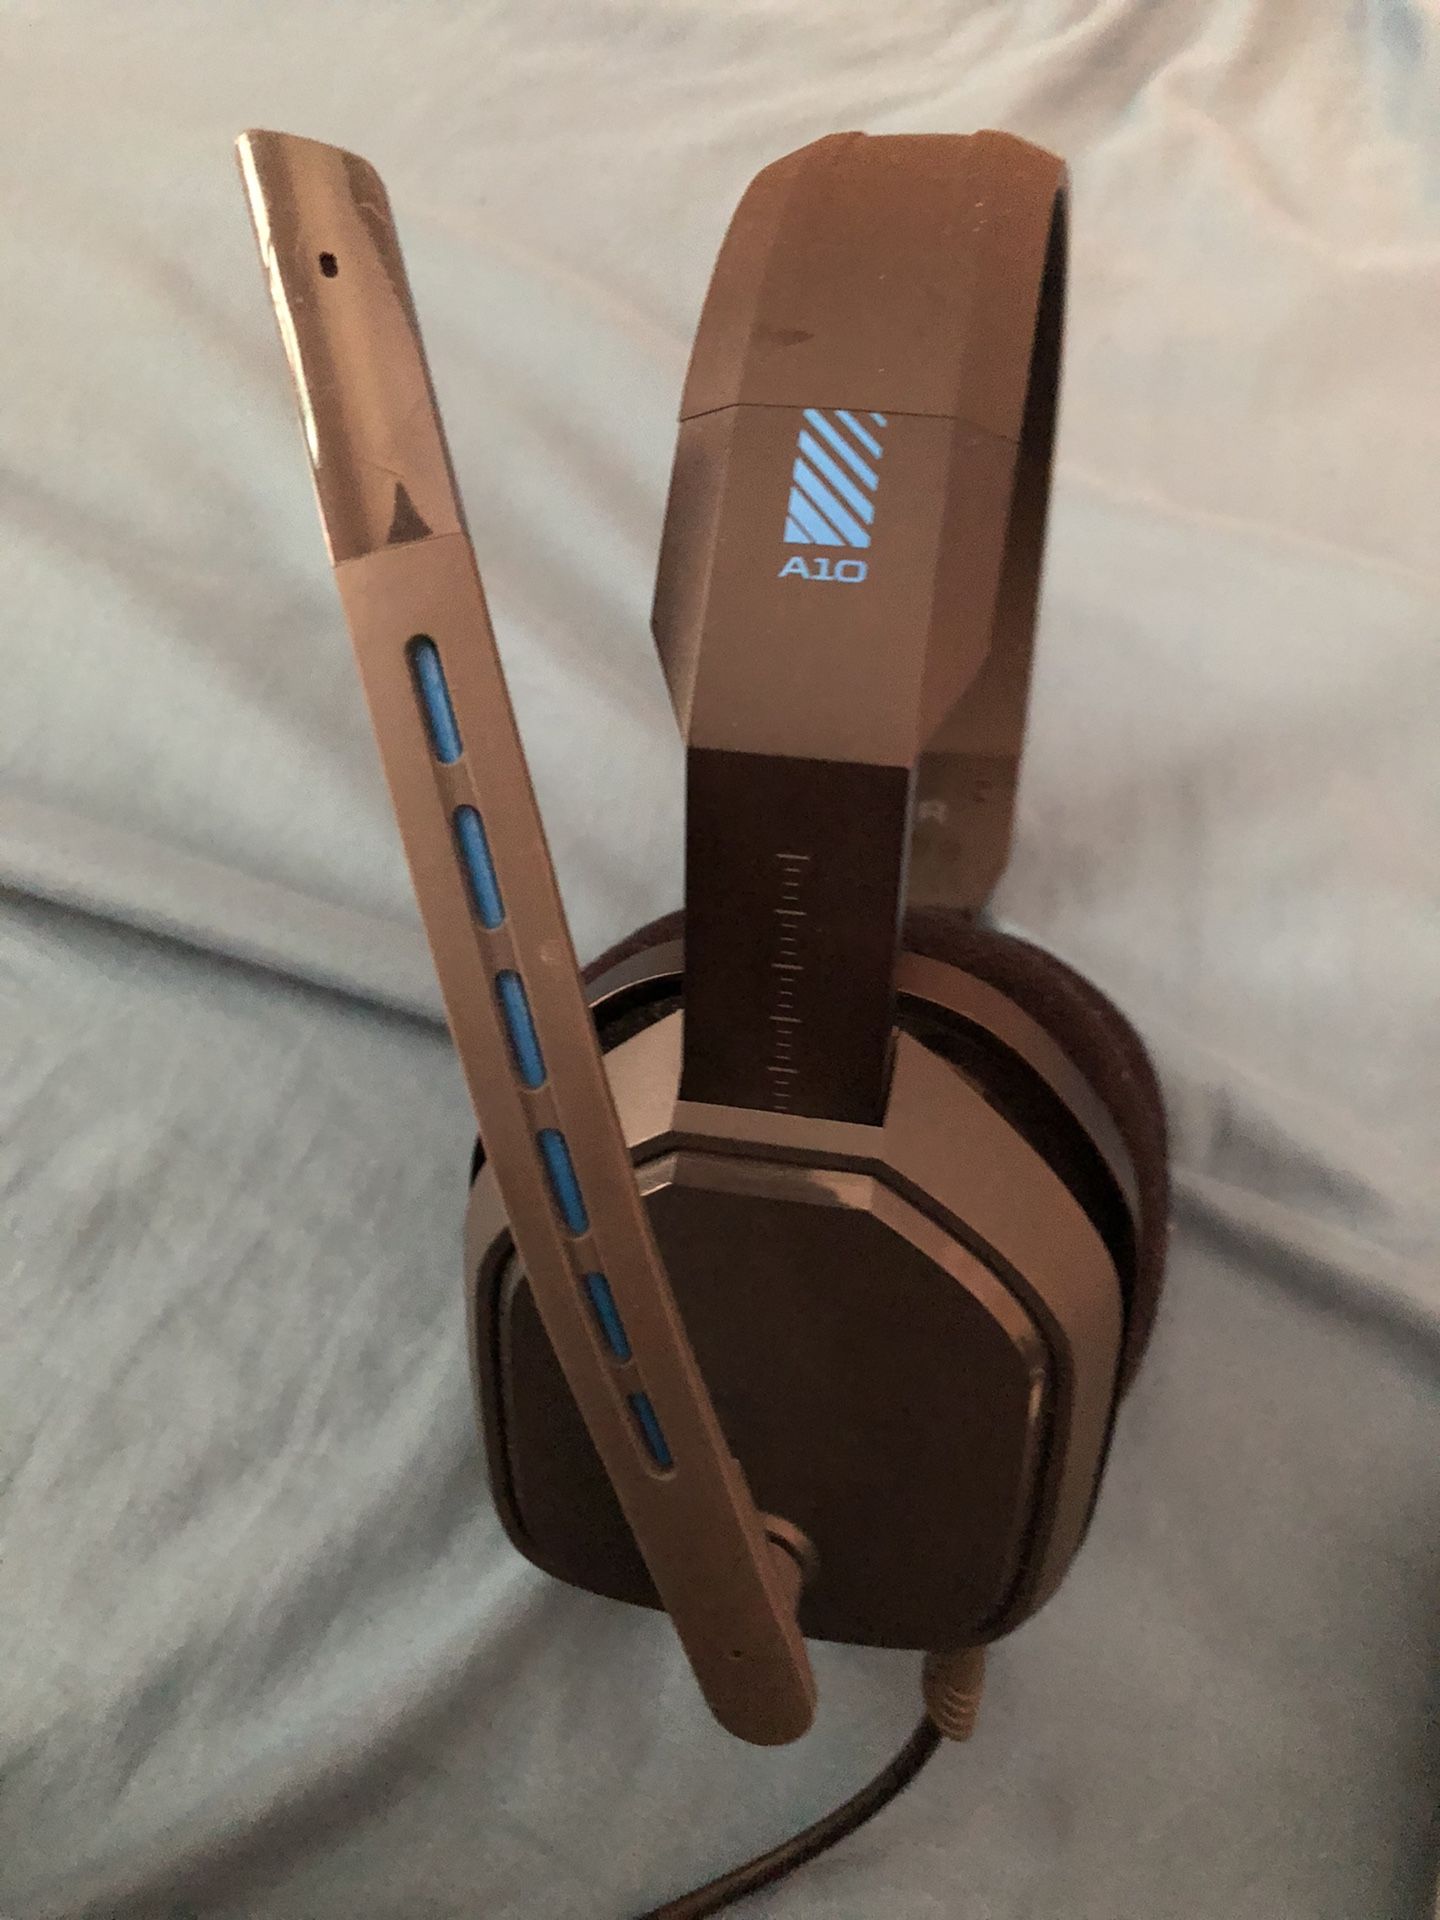 A-10 gaming headsets